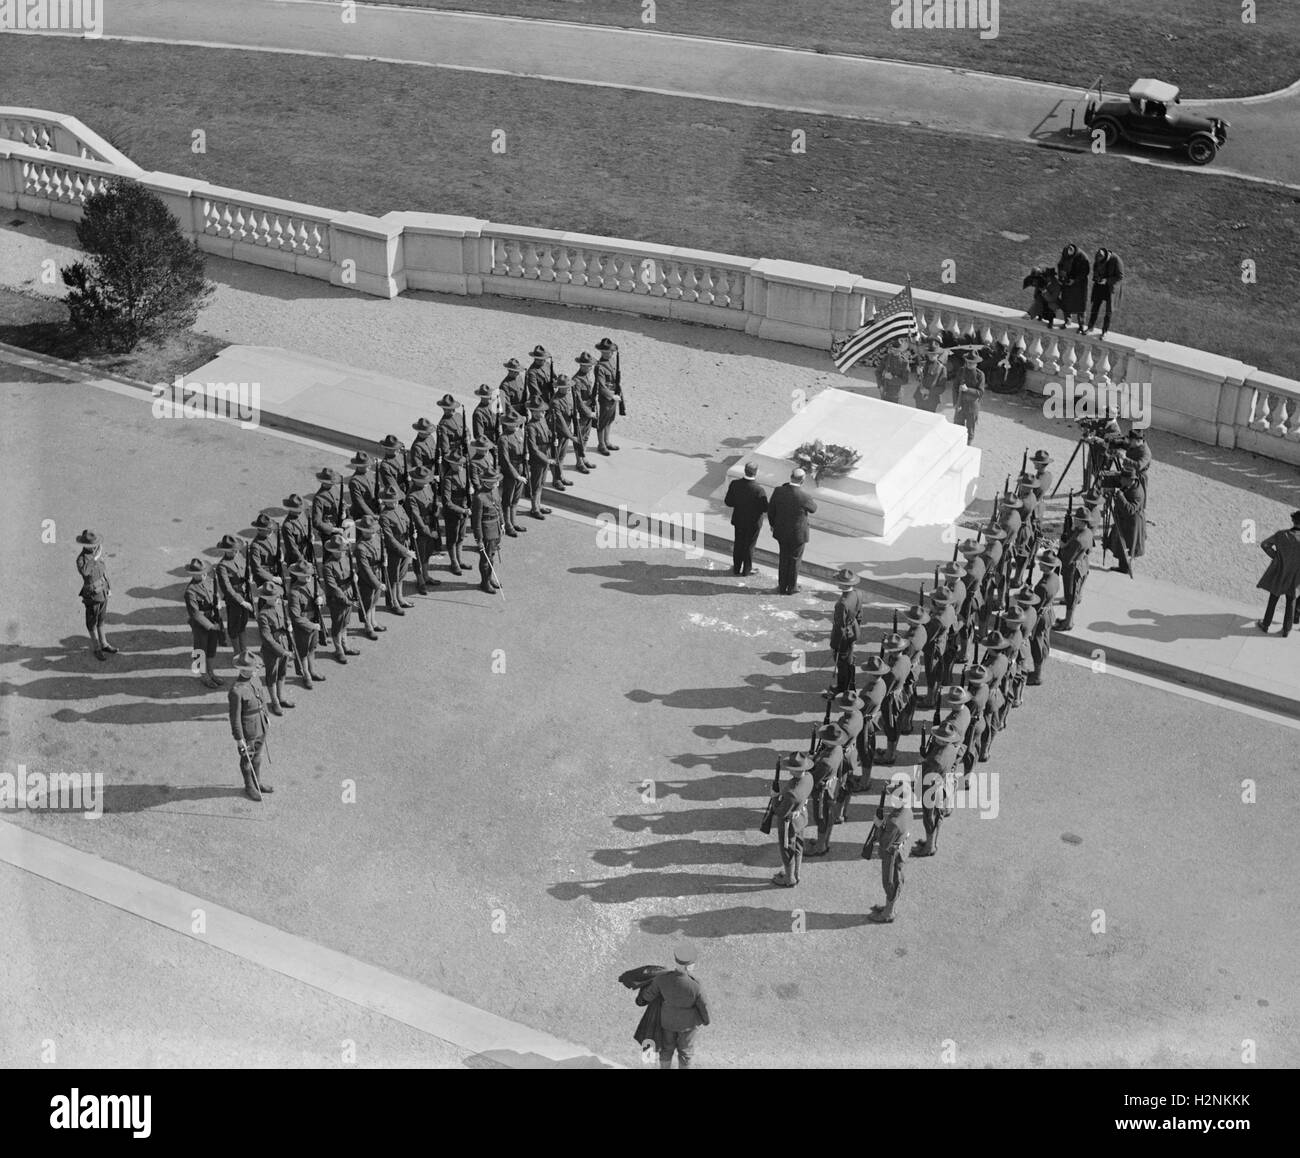 Military Formation at Tomb of Unknown Soldier, Arlington National Cemetery, Arlington, Virginia, USA, National Photo Company, October 1922 Stock Photo